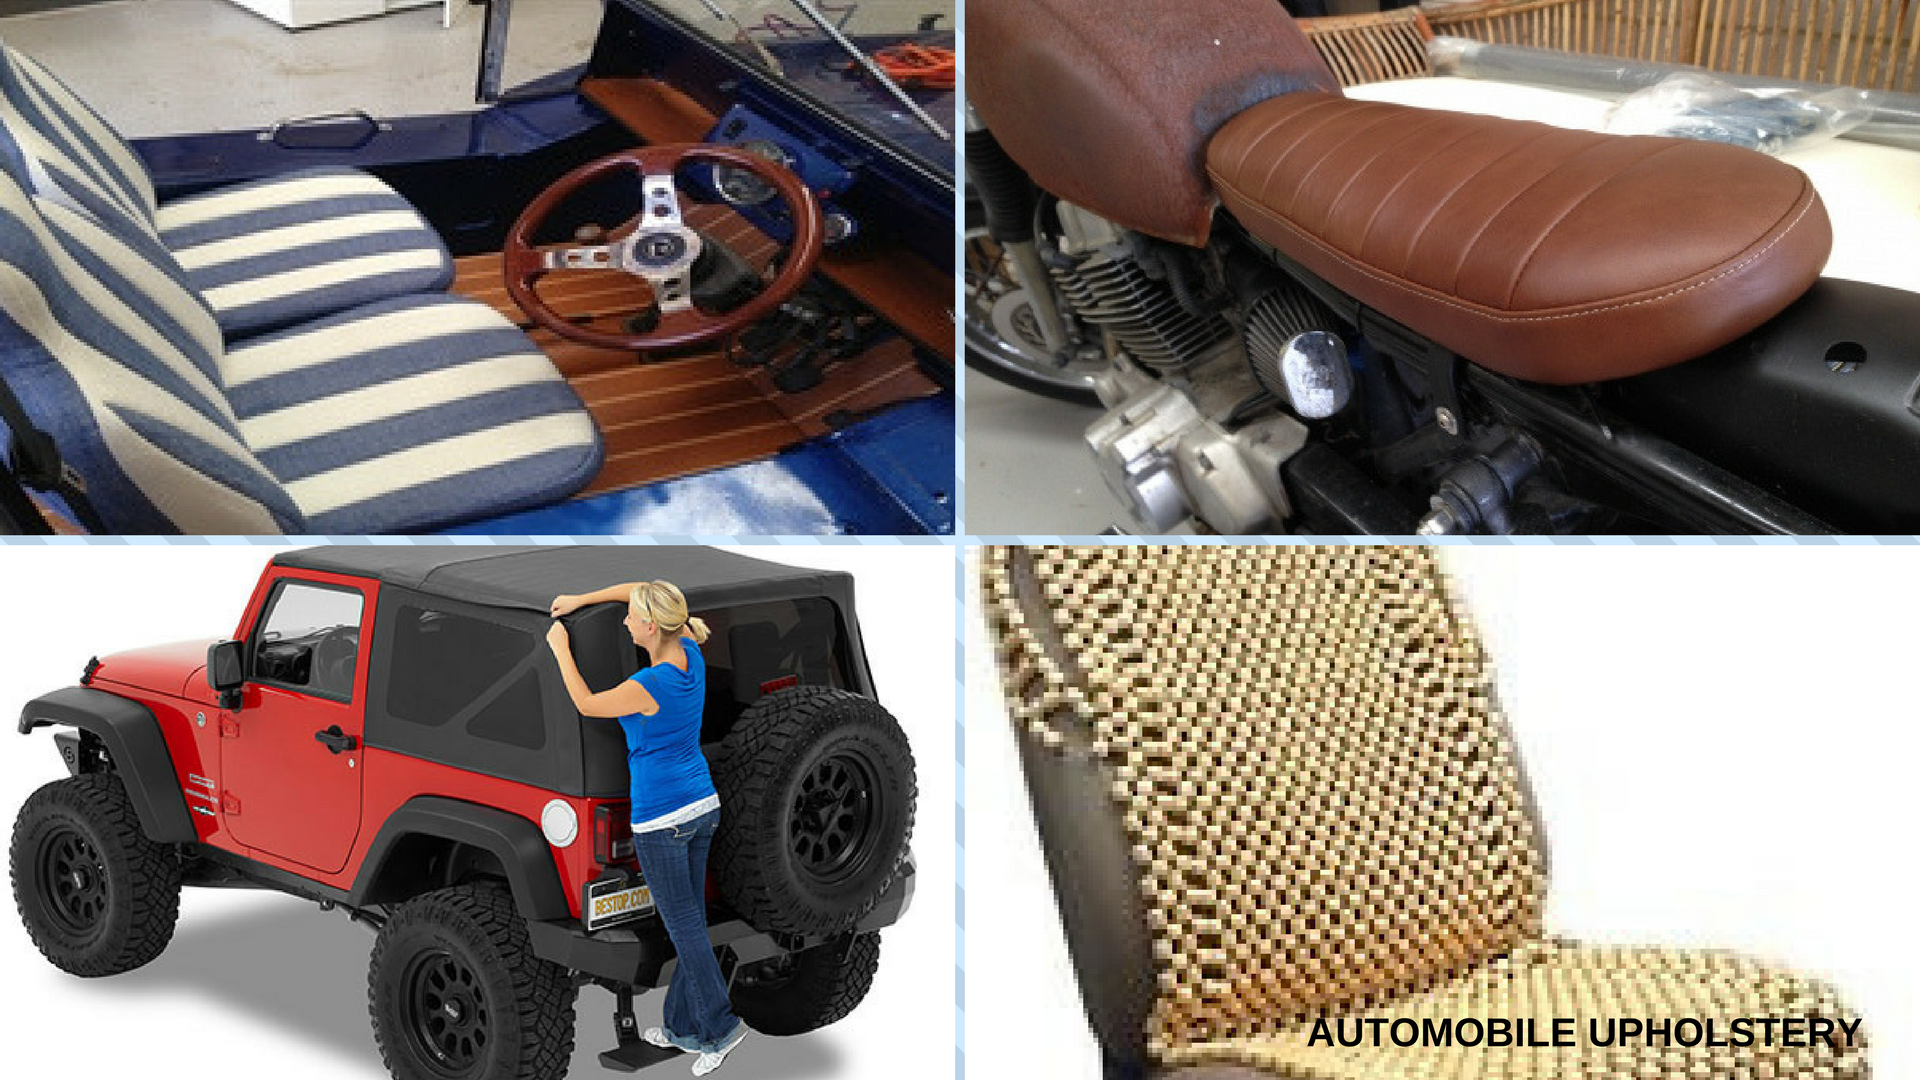 Automobile upholstery